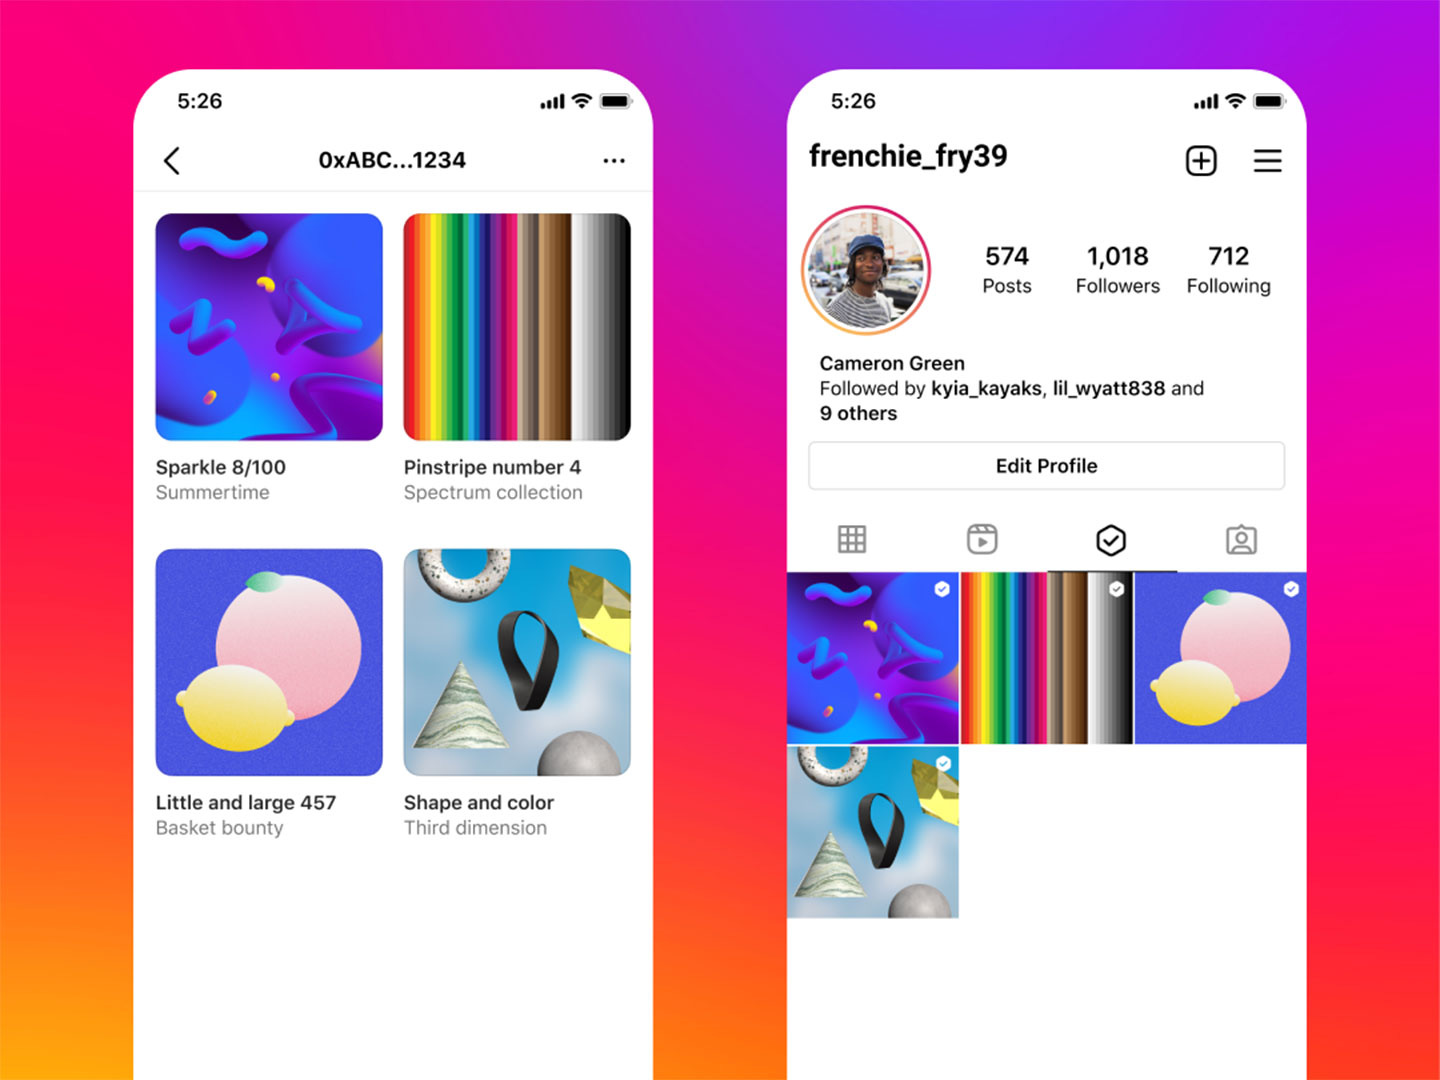 NFTs on Instagram and Facebook: How to Show Off Your Digital Collectibles